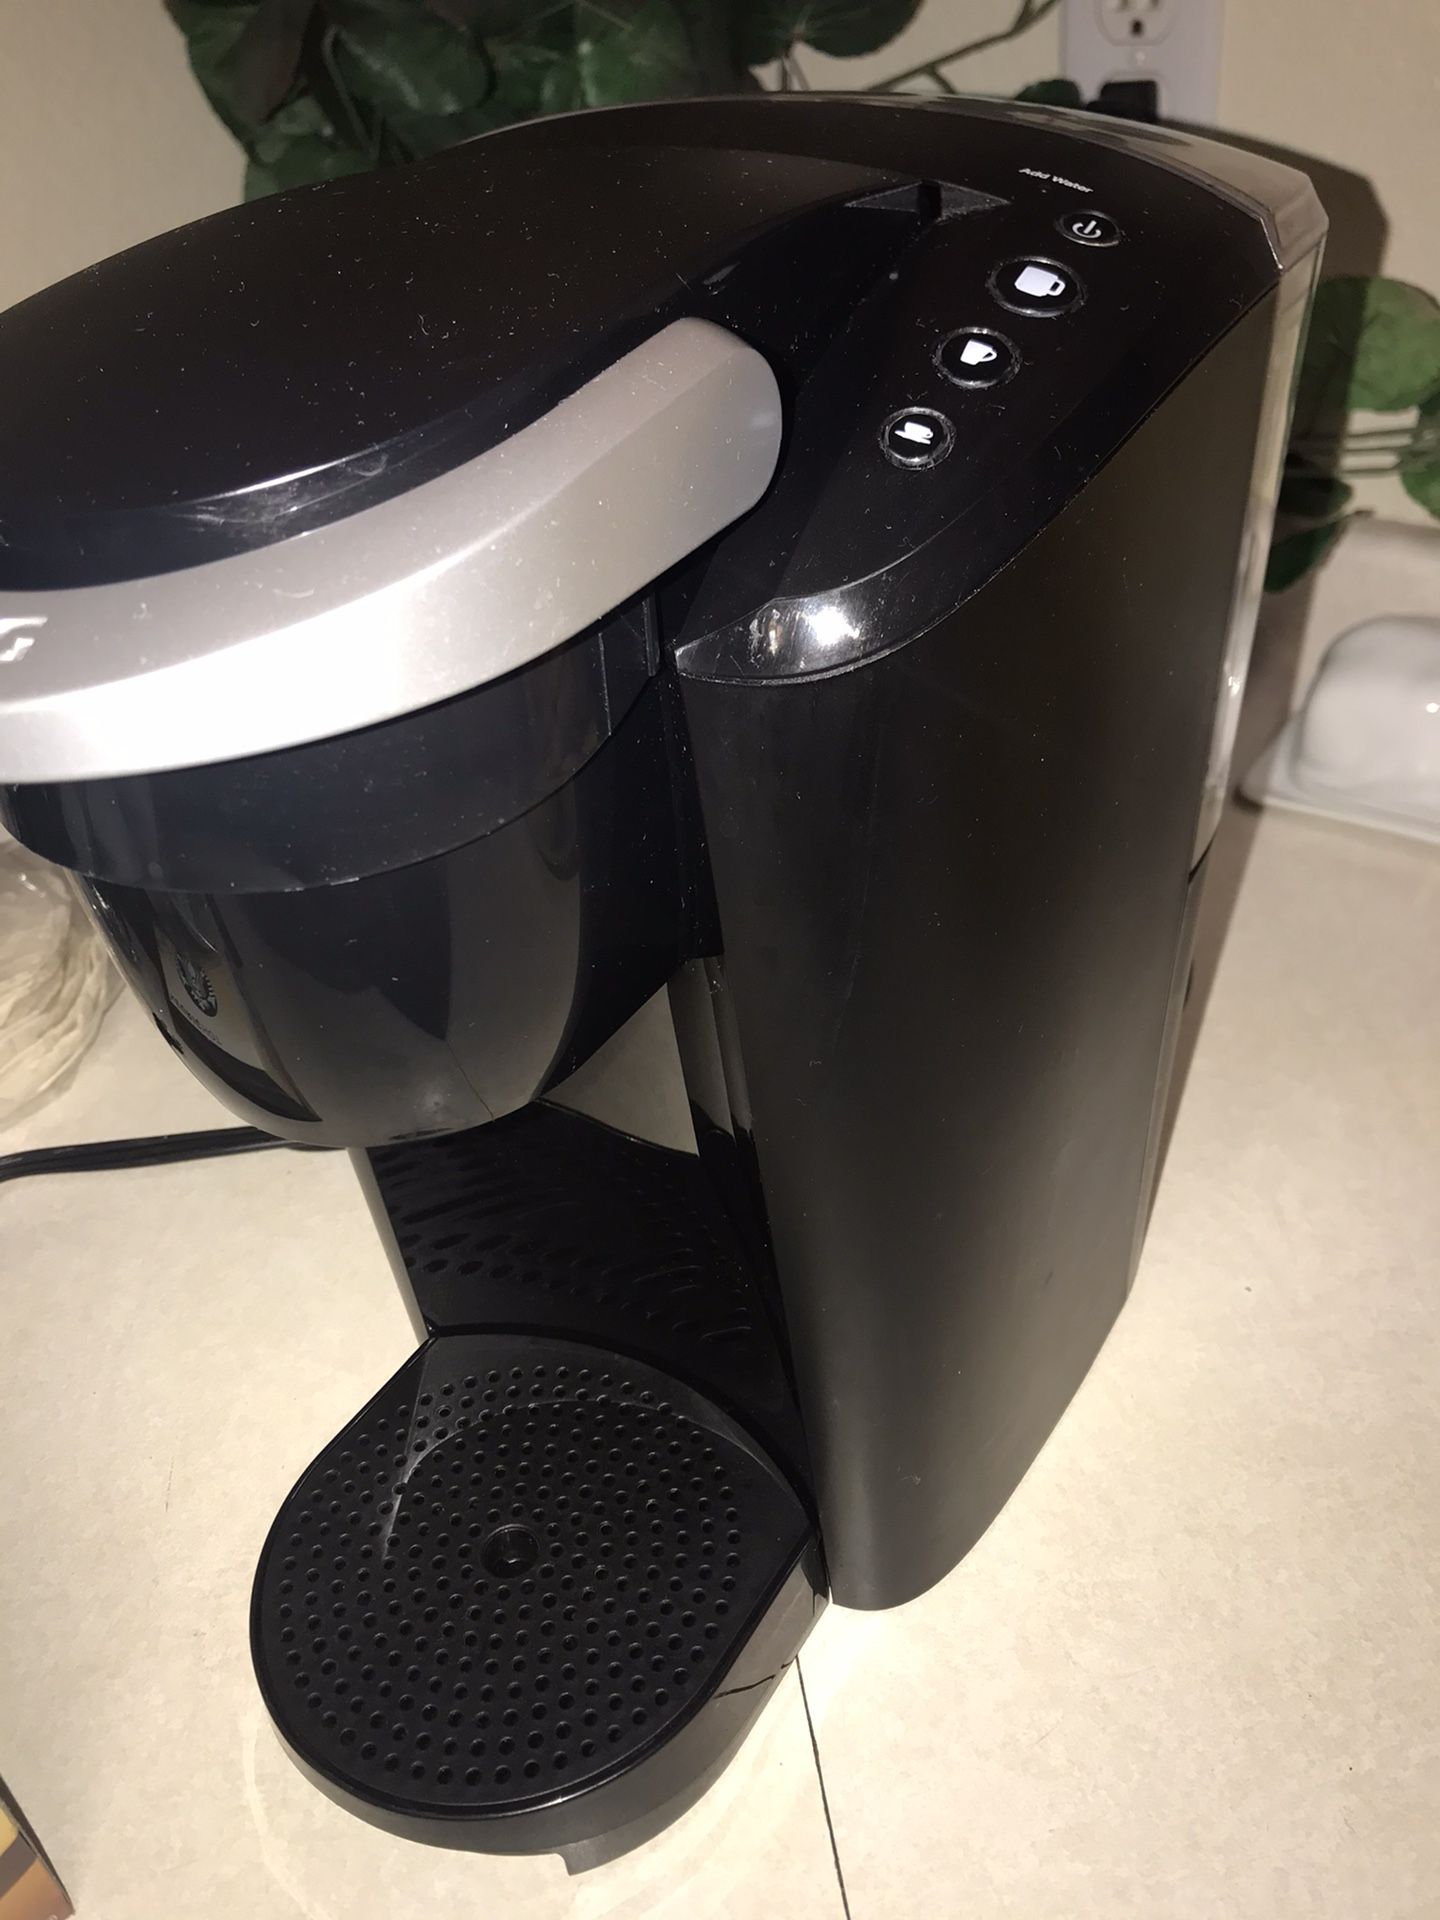 BARELY USED KUERIG COFFEE MAKER